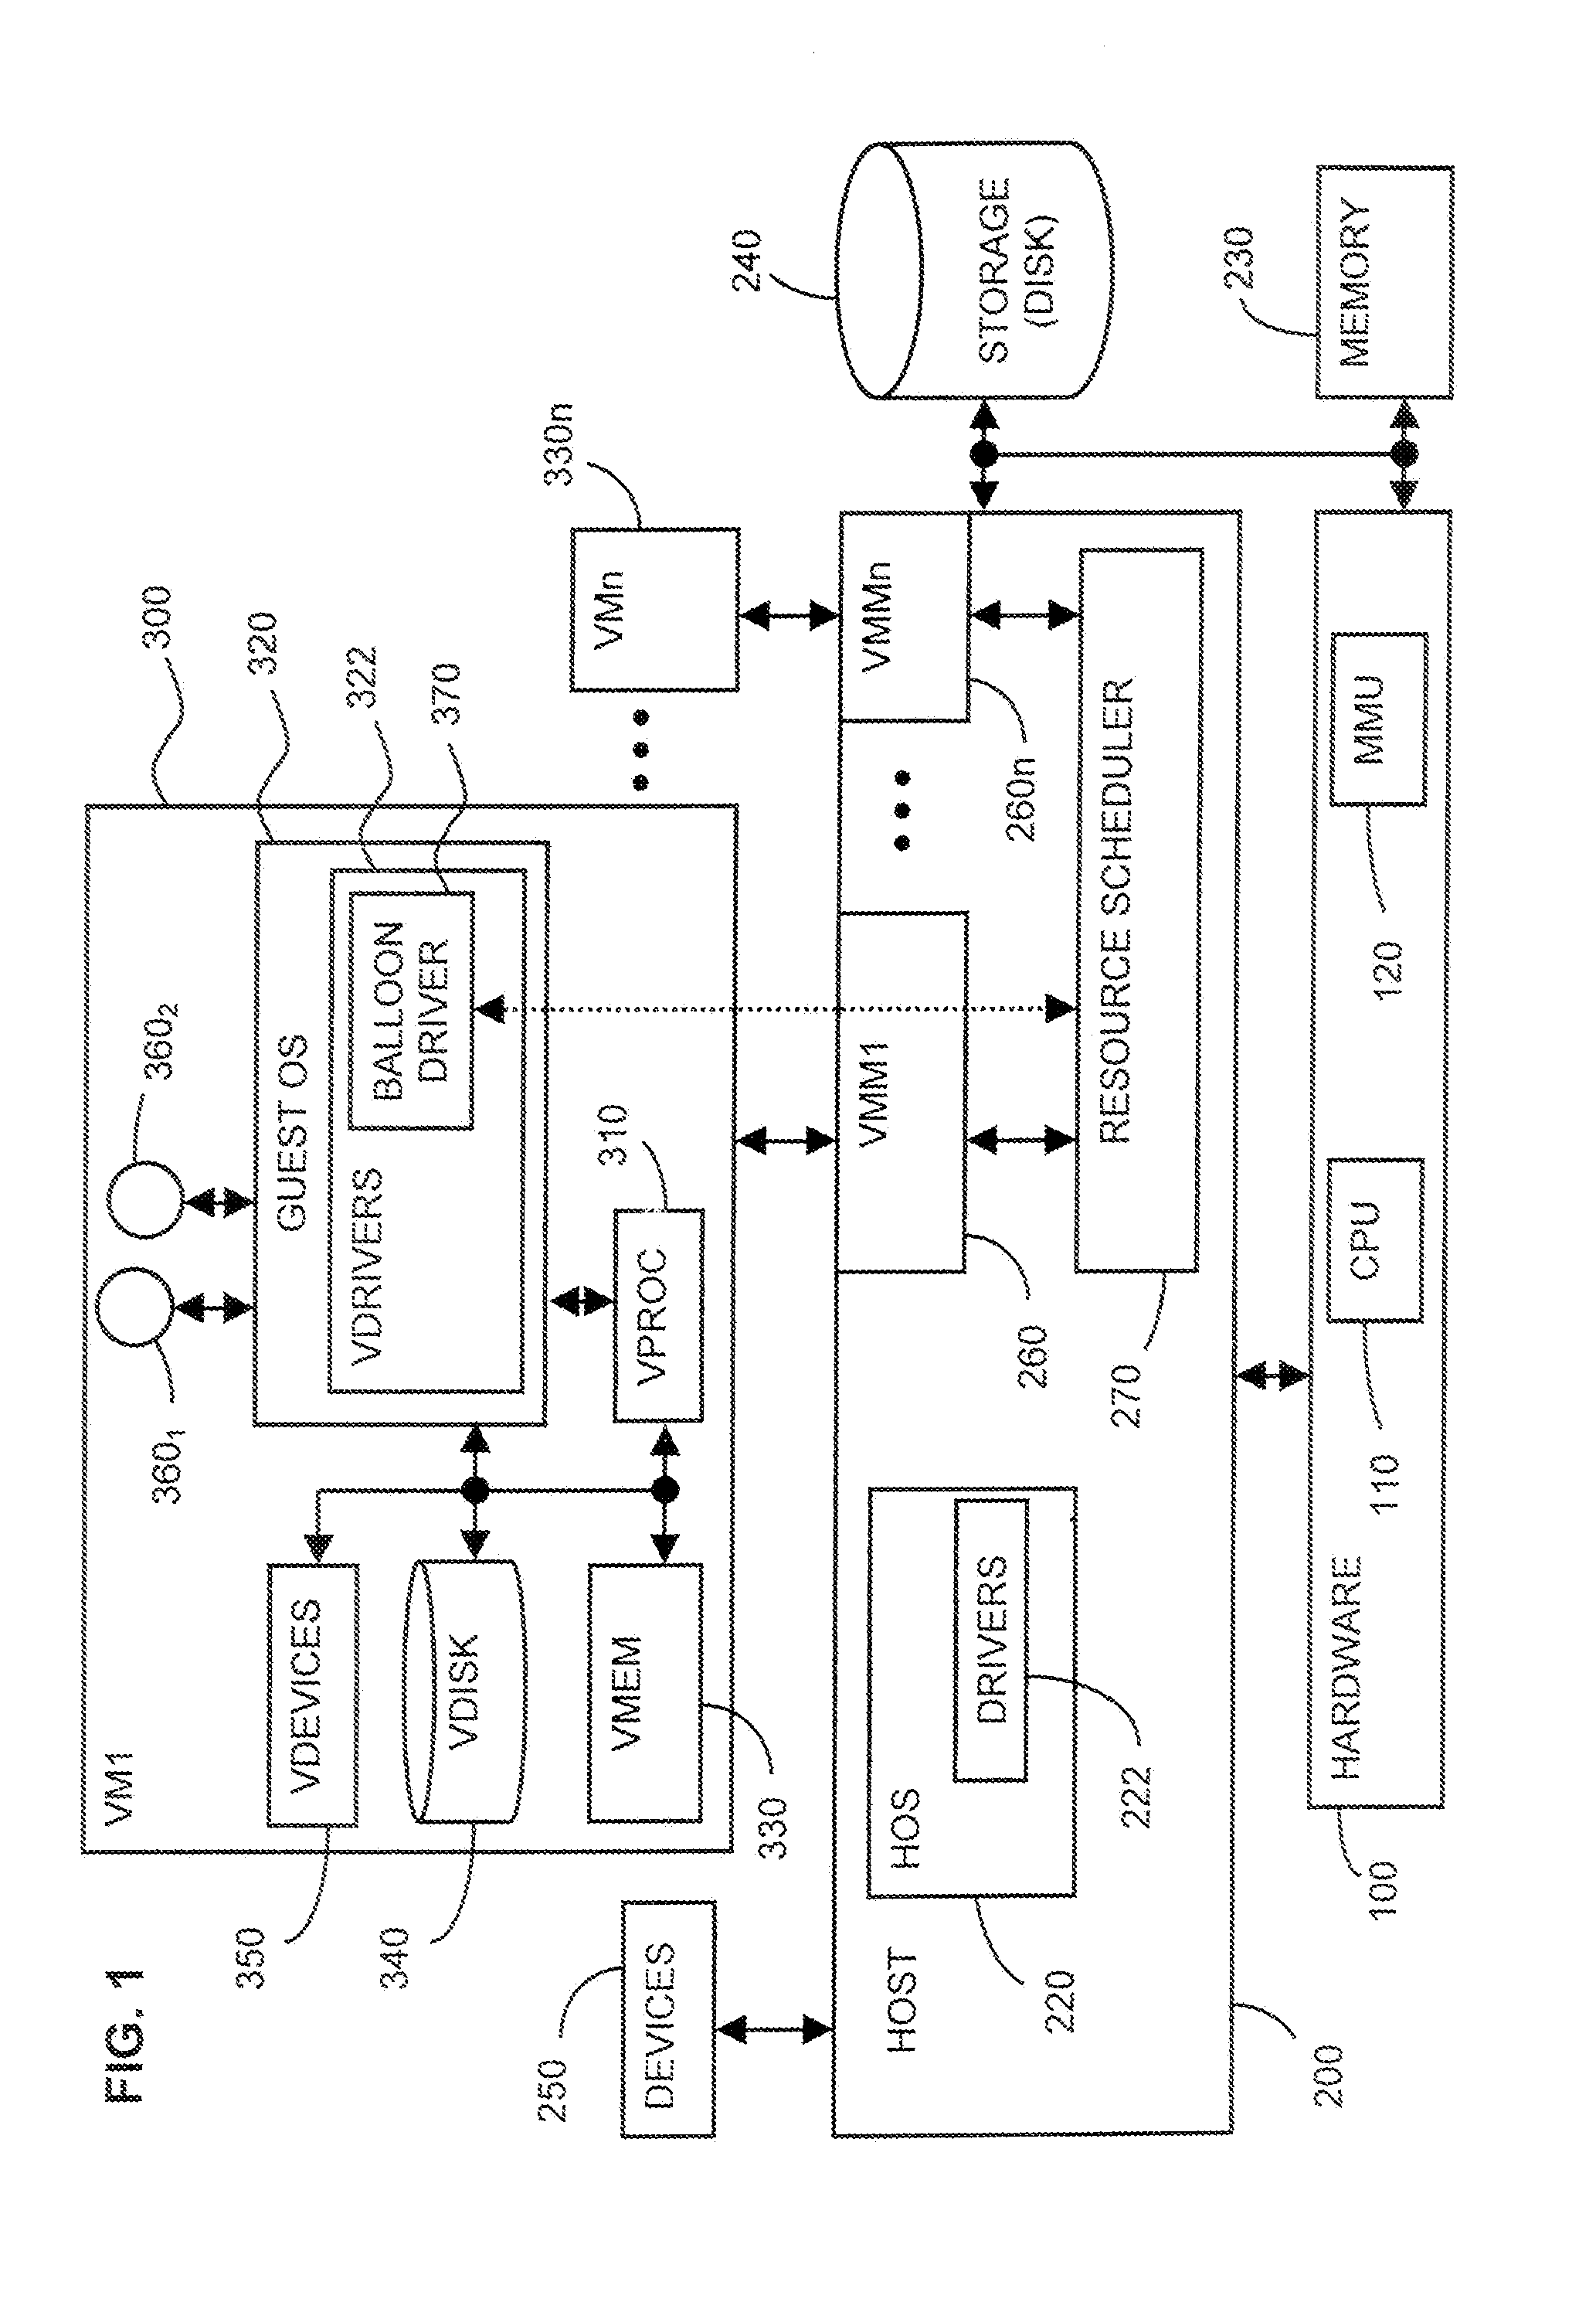 System and method for controlling resource revocation in a multi-guest computer system